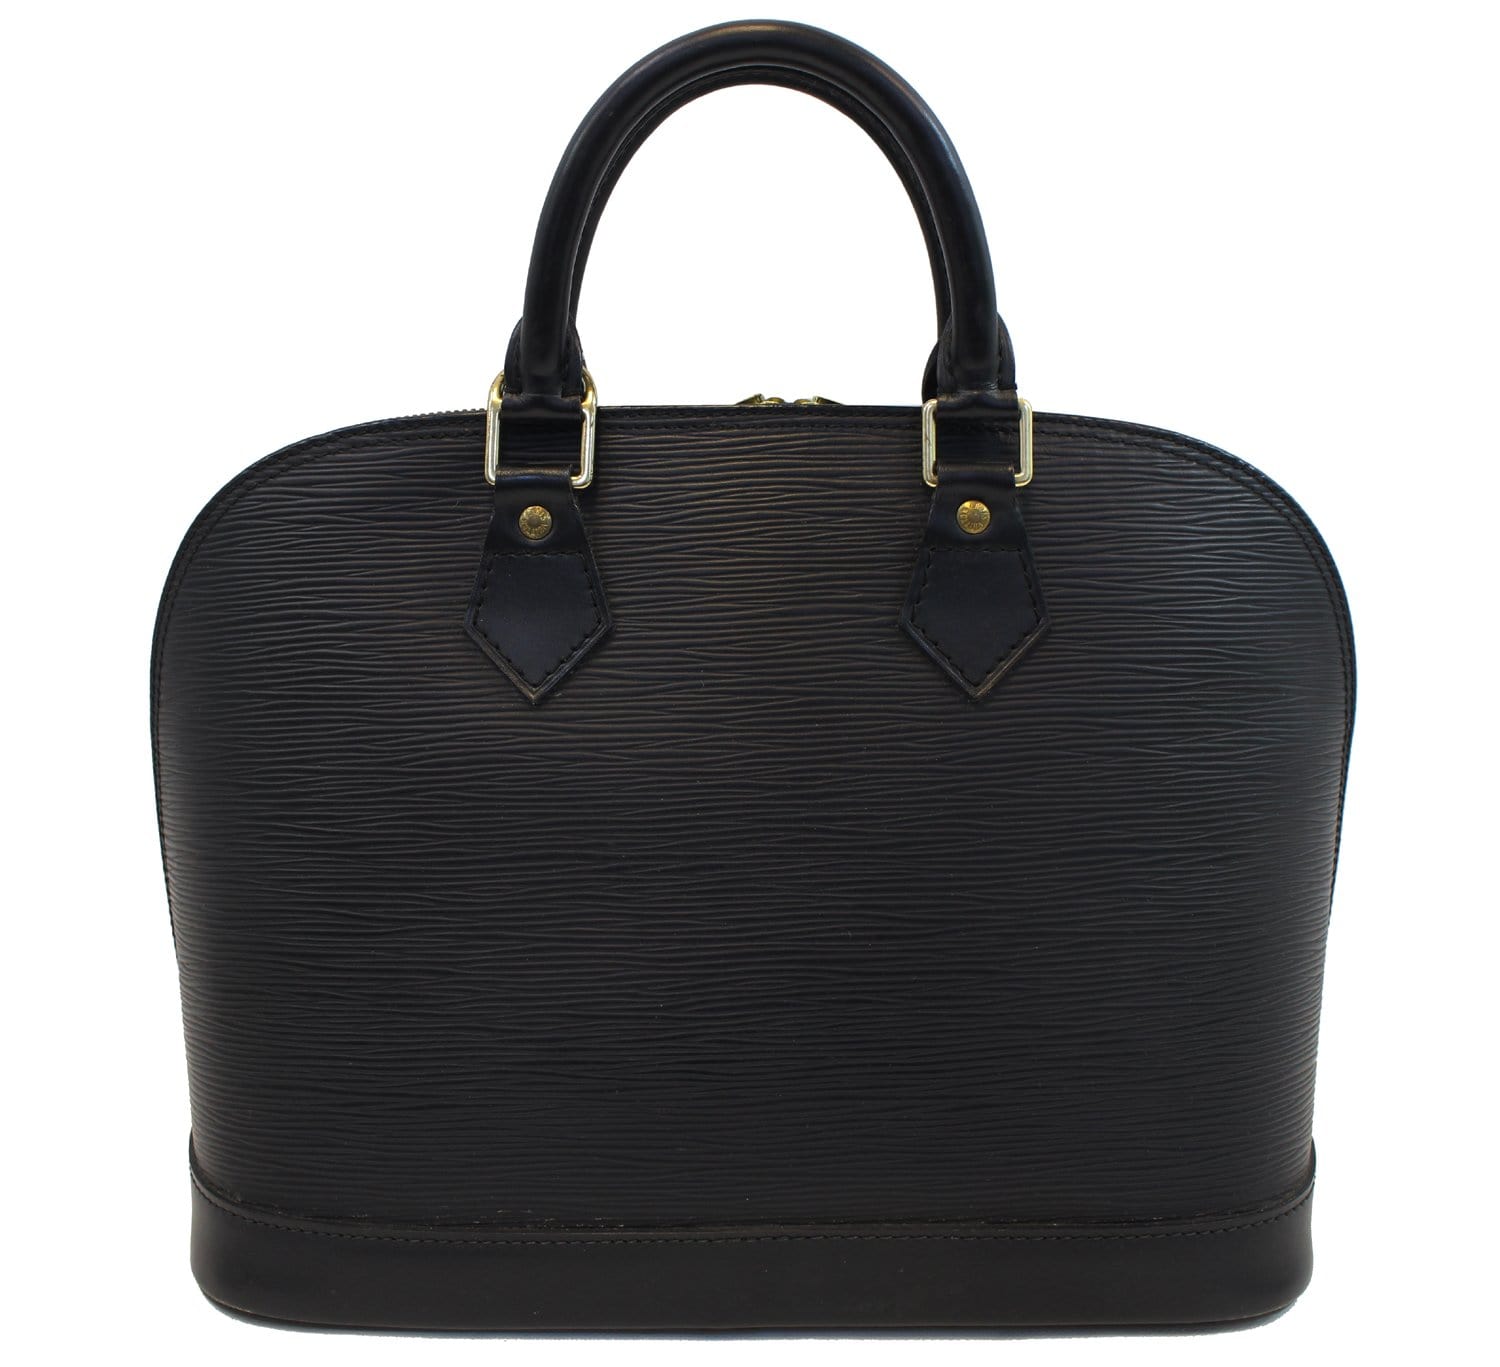 Alma BB bag in black epi leather Louis Vuitton - Second Hand